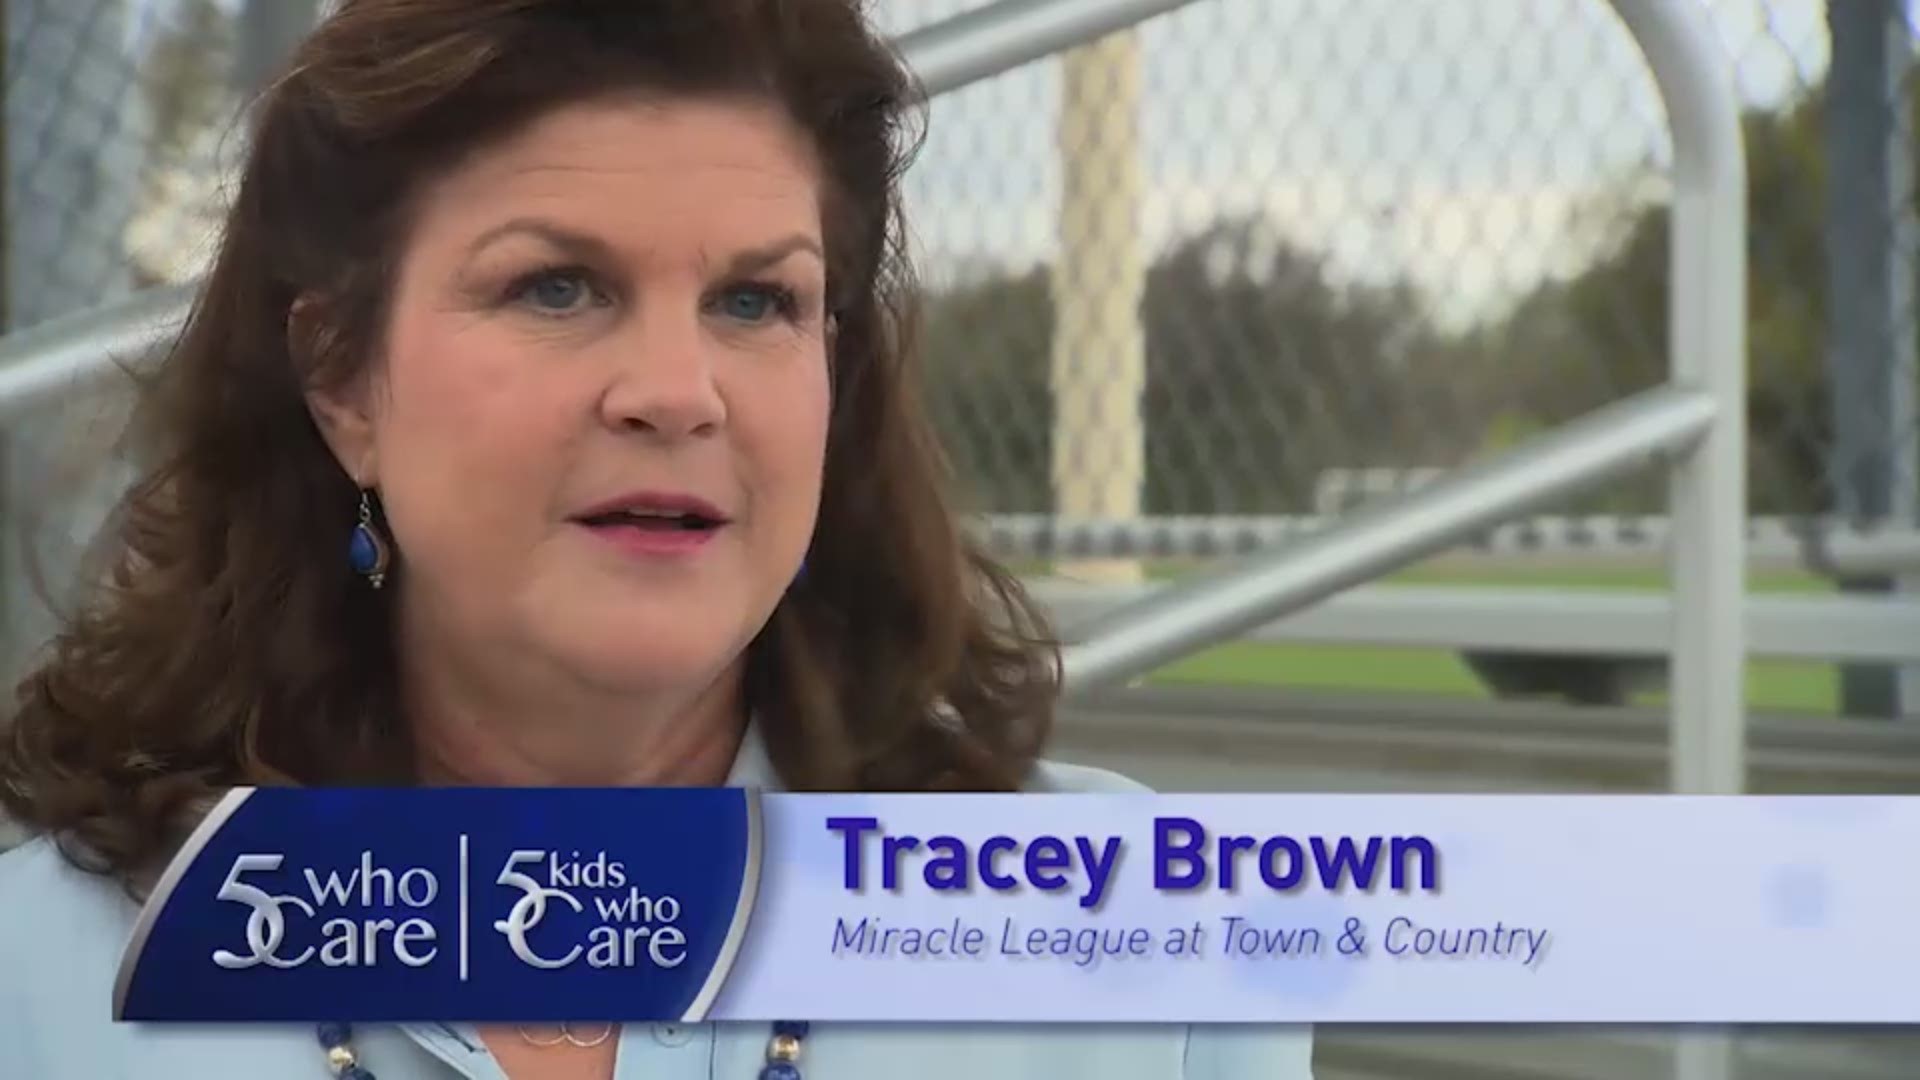 Tracey Brown: Miracle League at Town & Country